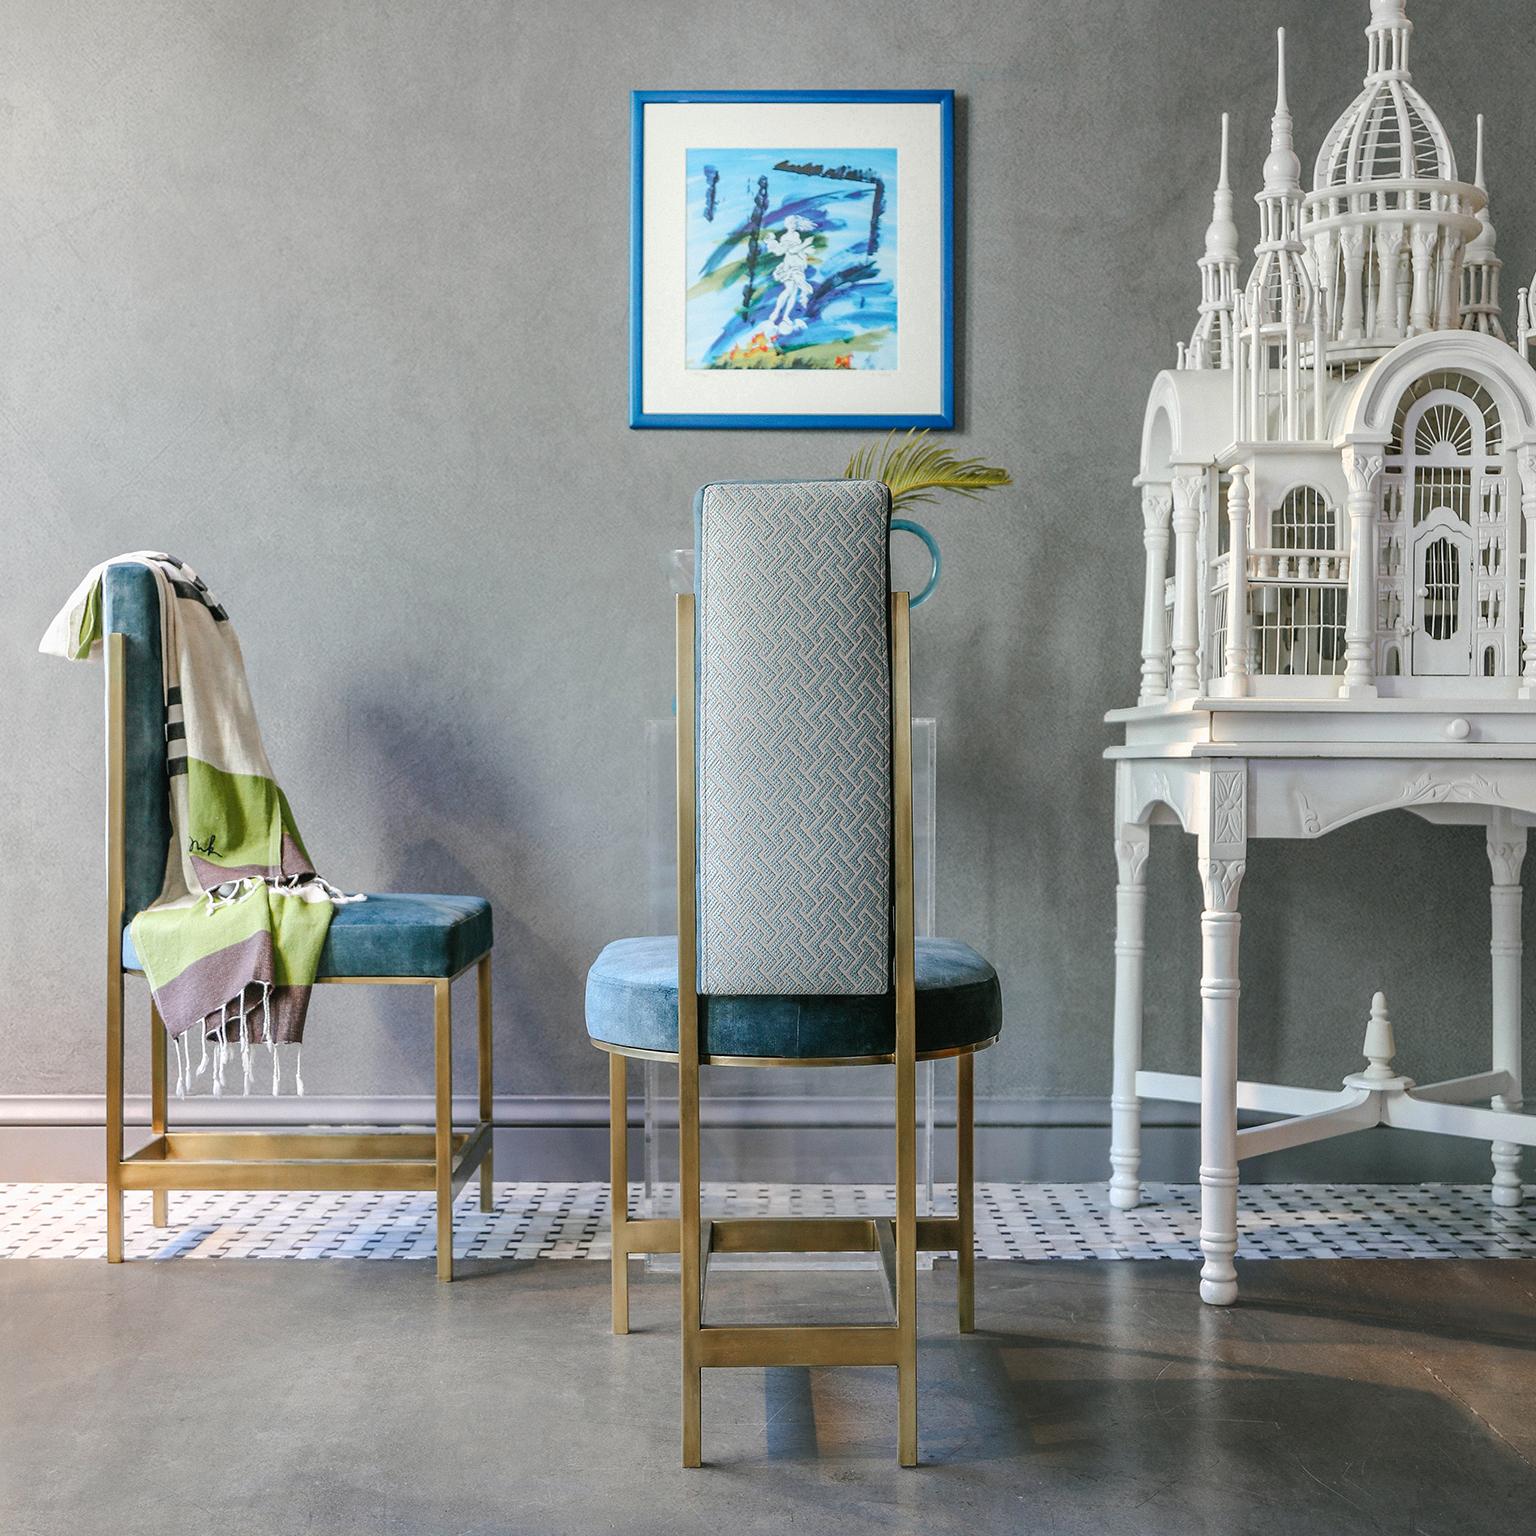 **LEAD TIME 5 WEEKS**

The recalled blue chair brings out your resonance for antiquity with its fine workmanship and aesthetic form combined with practical comfort.

Measures: Length: 17.7'' / Depth: 20.9'' / Height: 36.2'' / Seat Height: